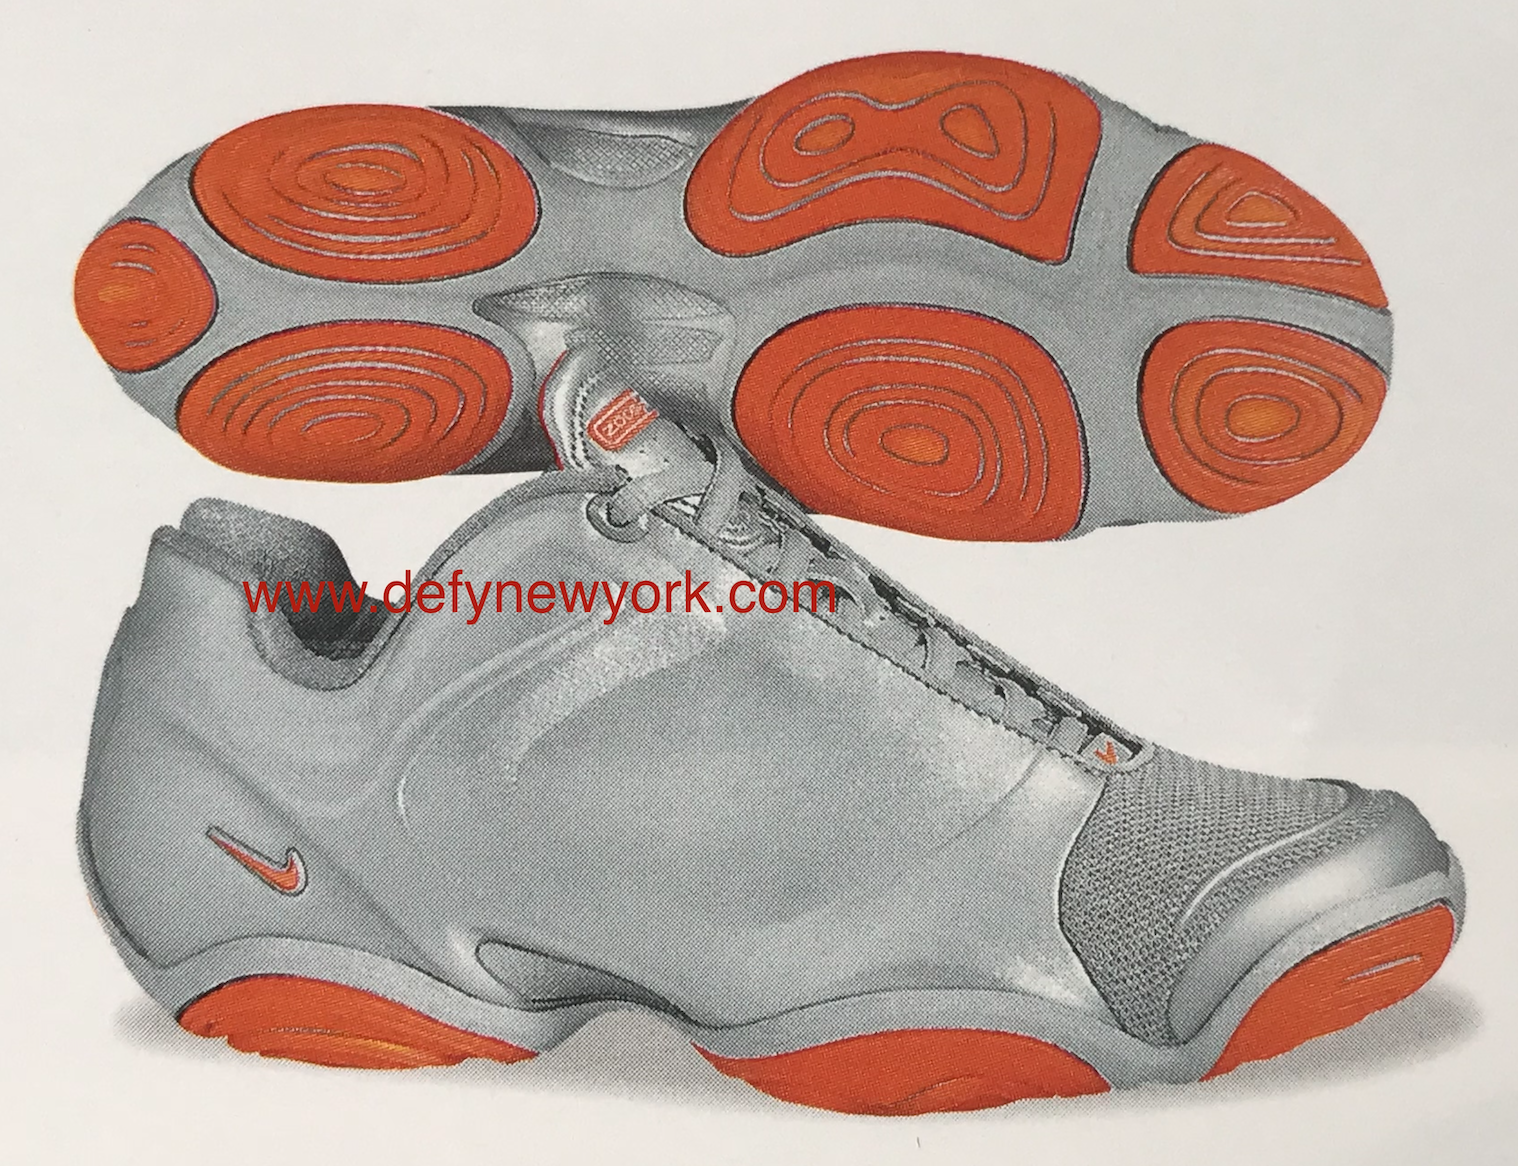 A Volleyball Shoe Never Looked So Good: Nike Air Zoom Flexposite 2003